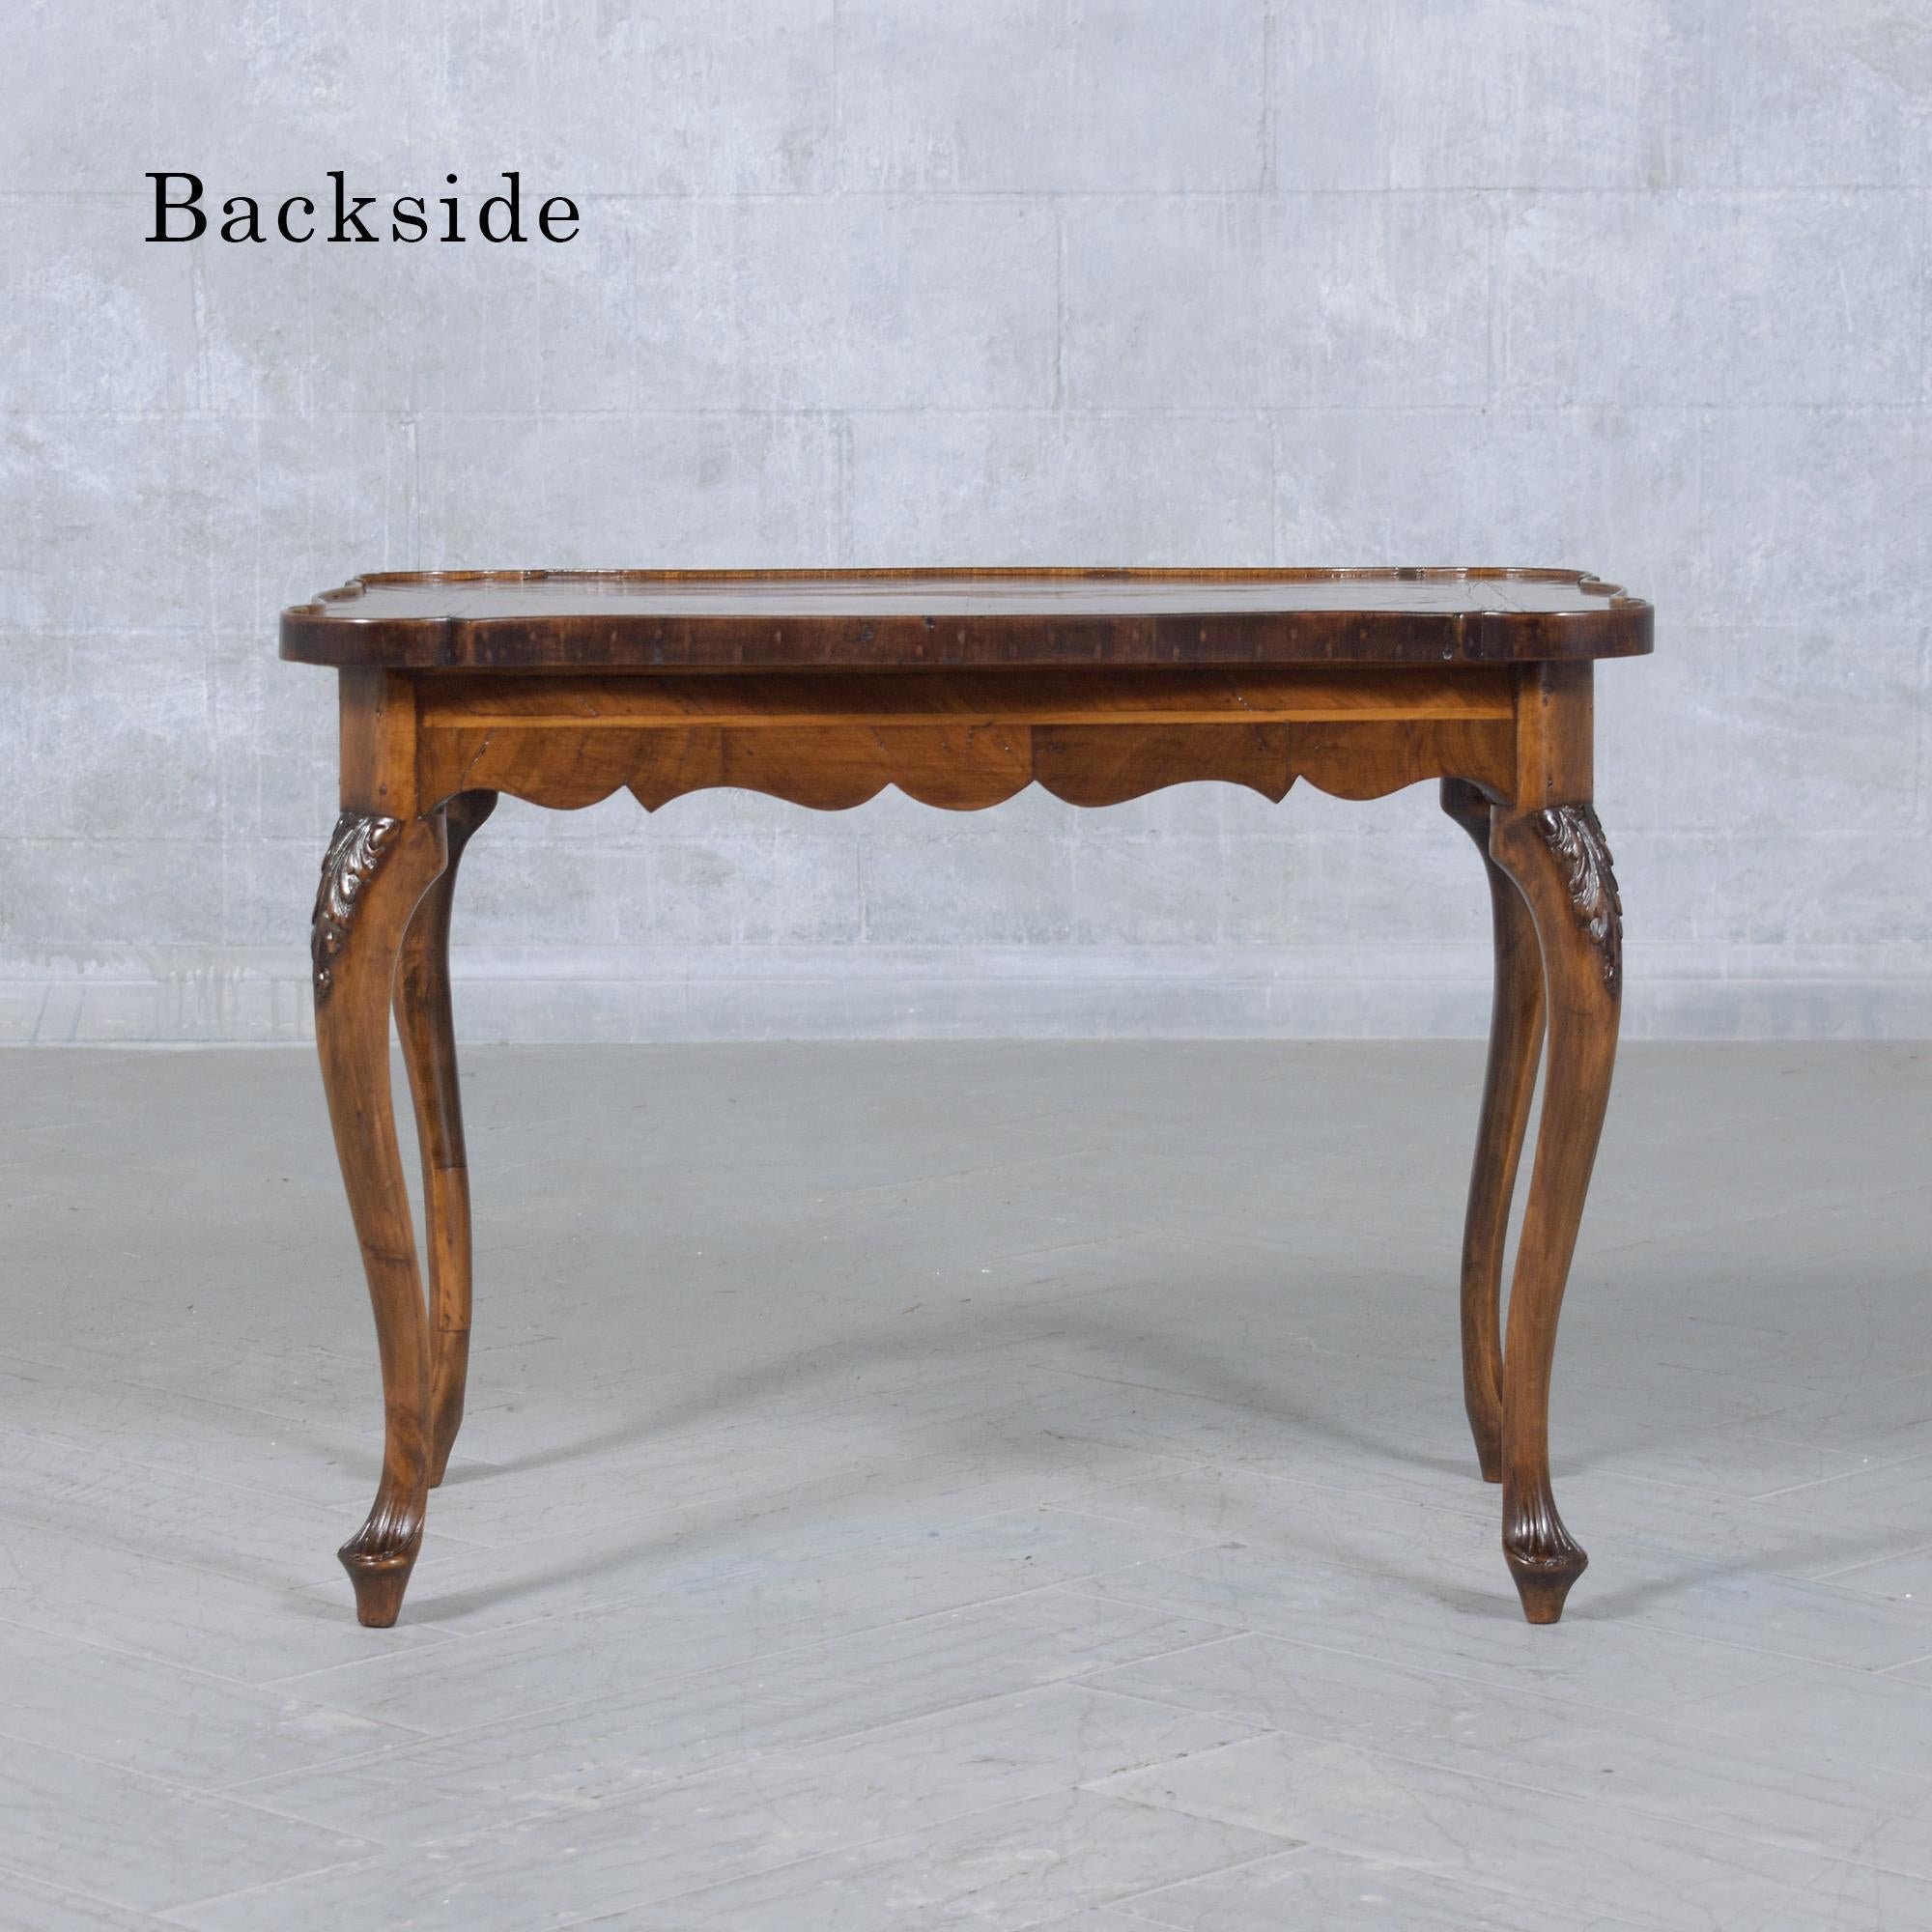 Wood Late 19th-Century English Walnut Side Table with Inlaid Pattern For Sale